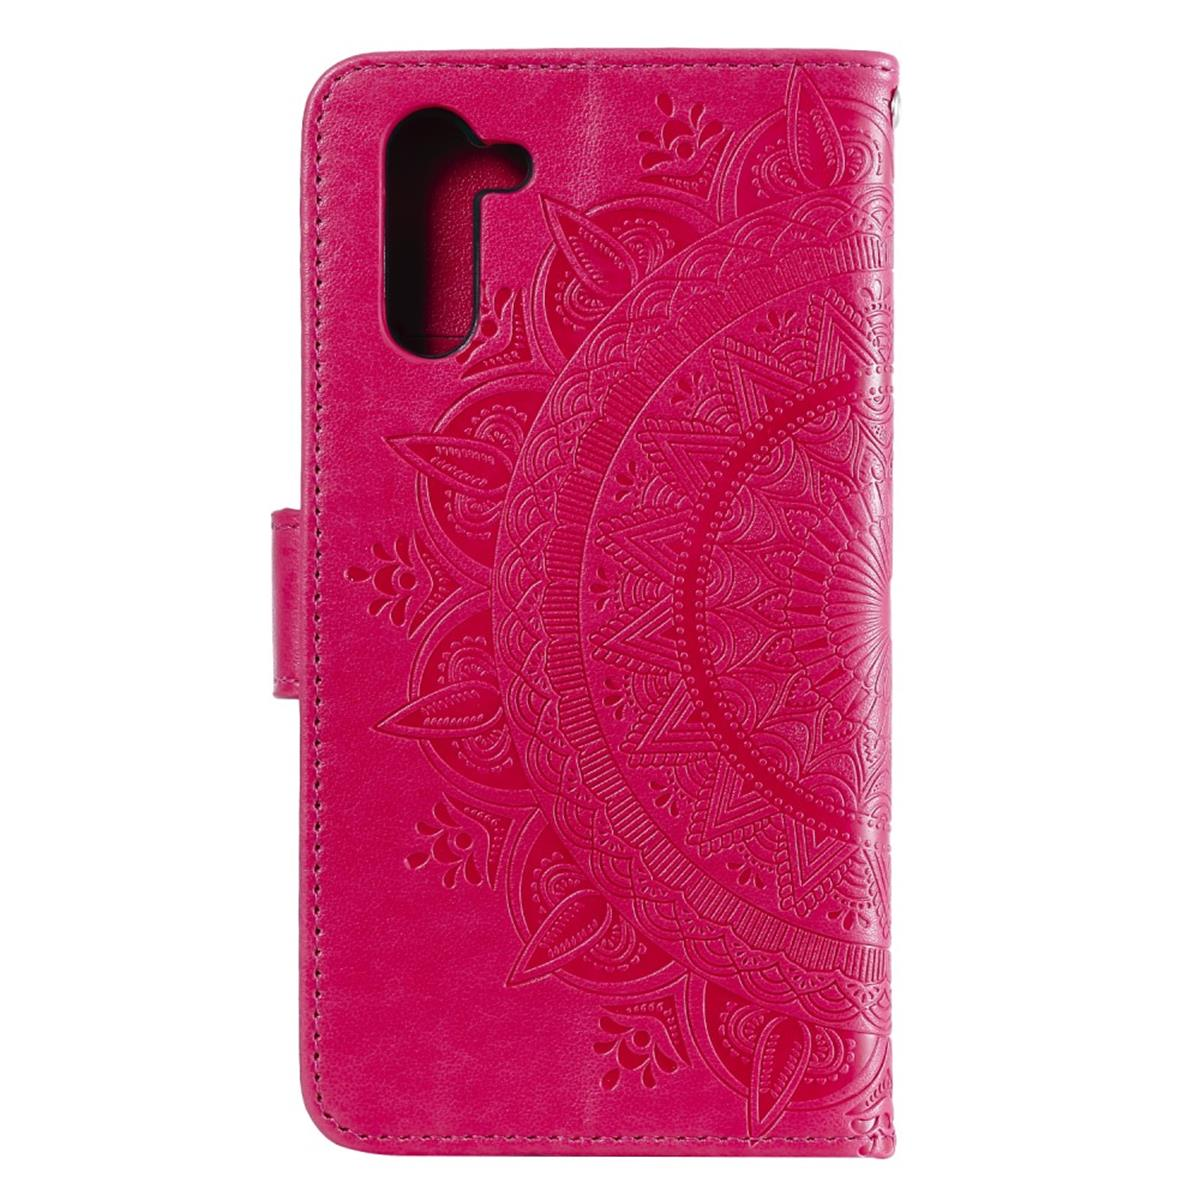 COVERKINGZ Klapphülle mit Mandala Samsung, Note10, Galaxy Pink Muster, Bookcover